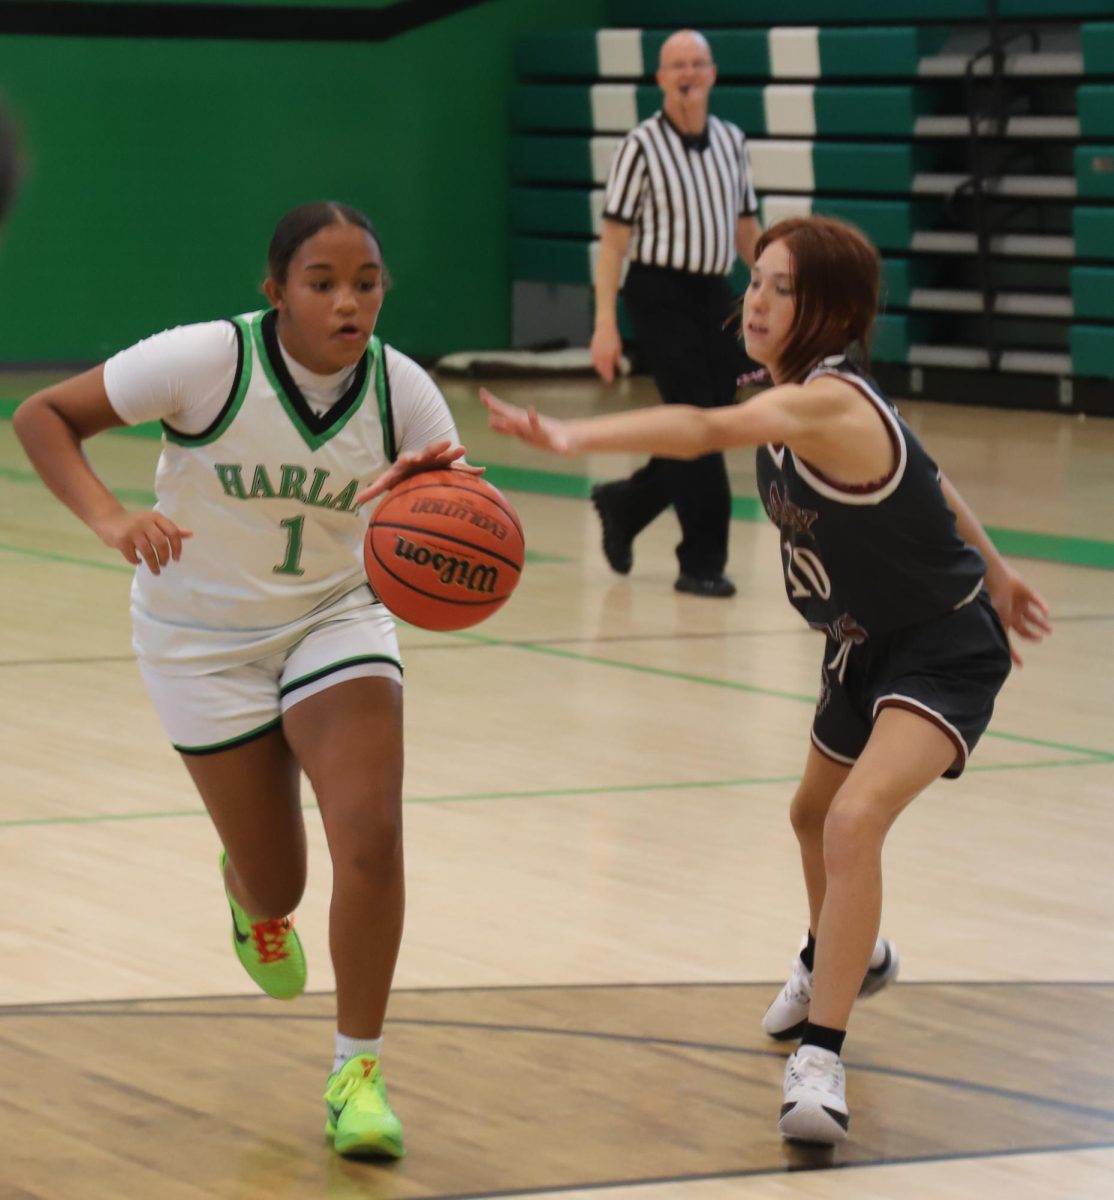 Harlan+guard+Peyshaunce+Wynn+drove+past+a+Cumberland+defender+in+the+season+opener+for+both+teams+Friday.+Wynn+scored+21+points+in+the+Lady+Dragons+42-2+victory.